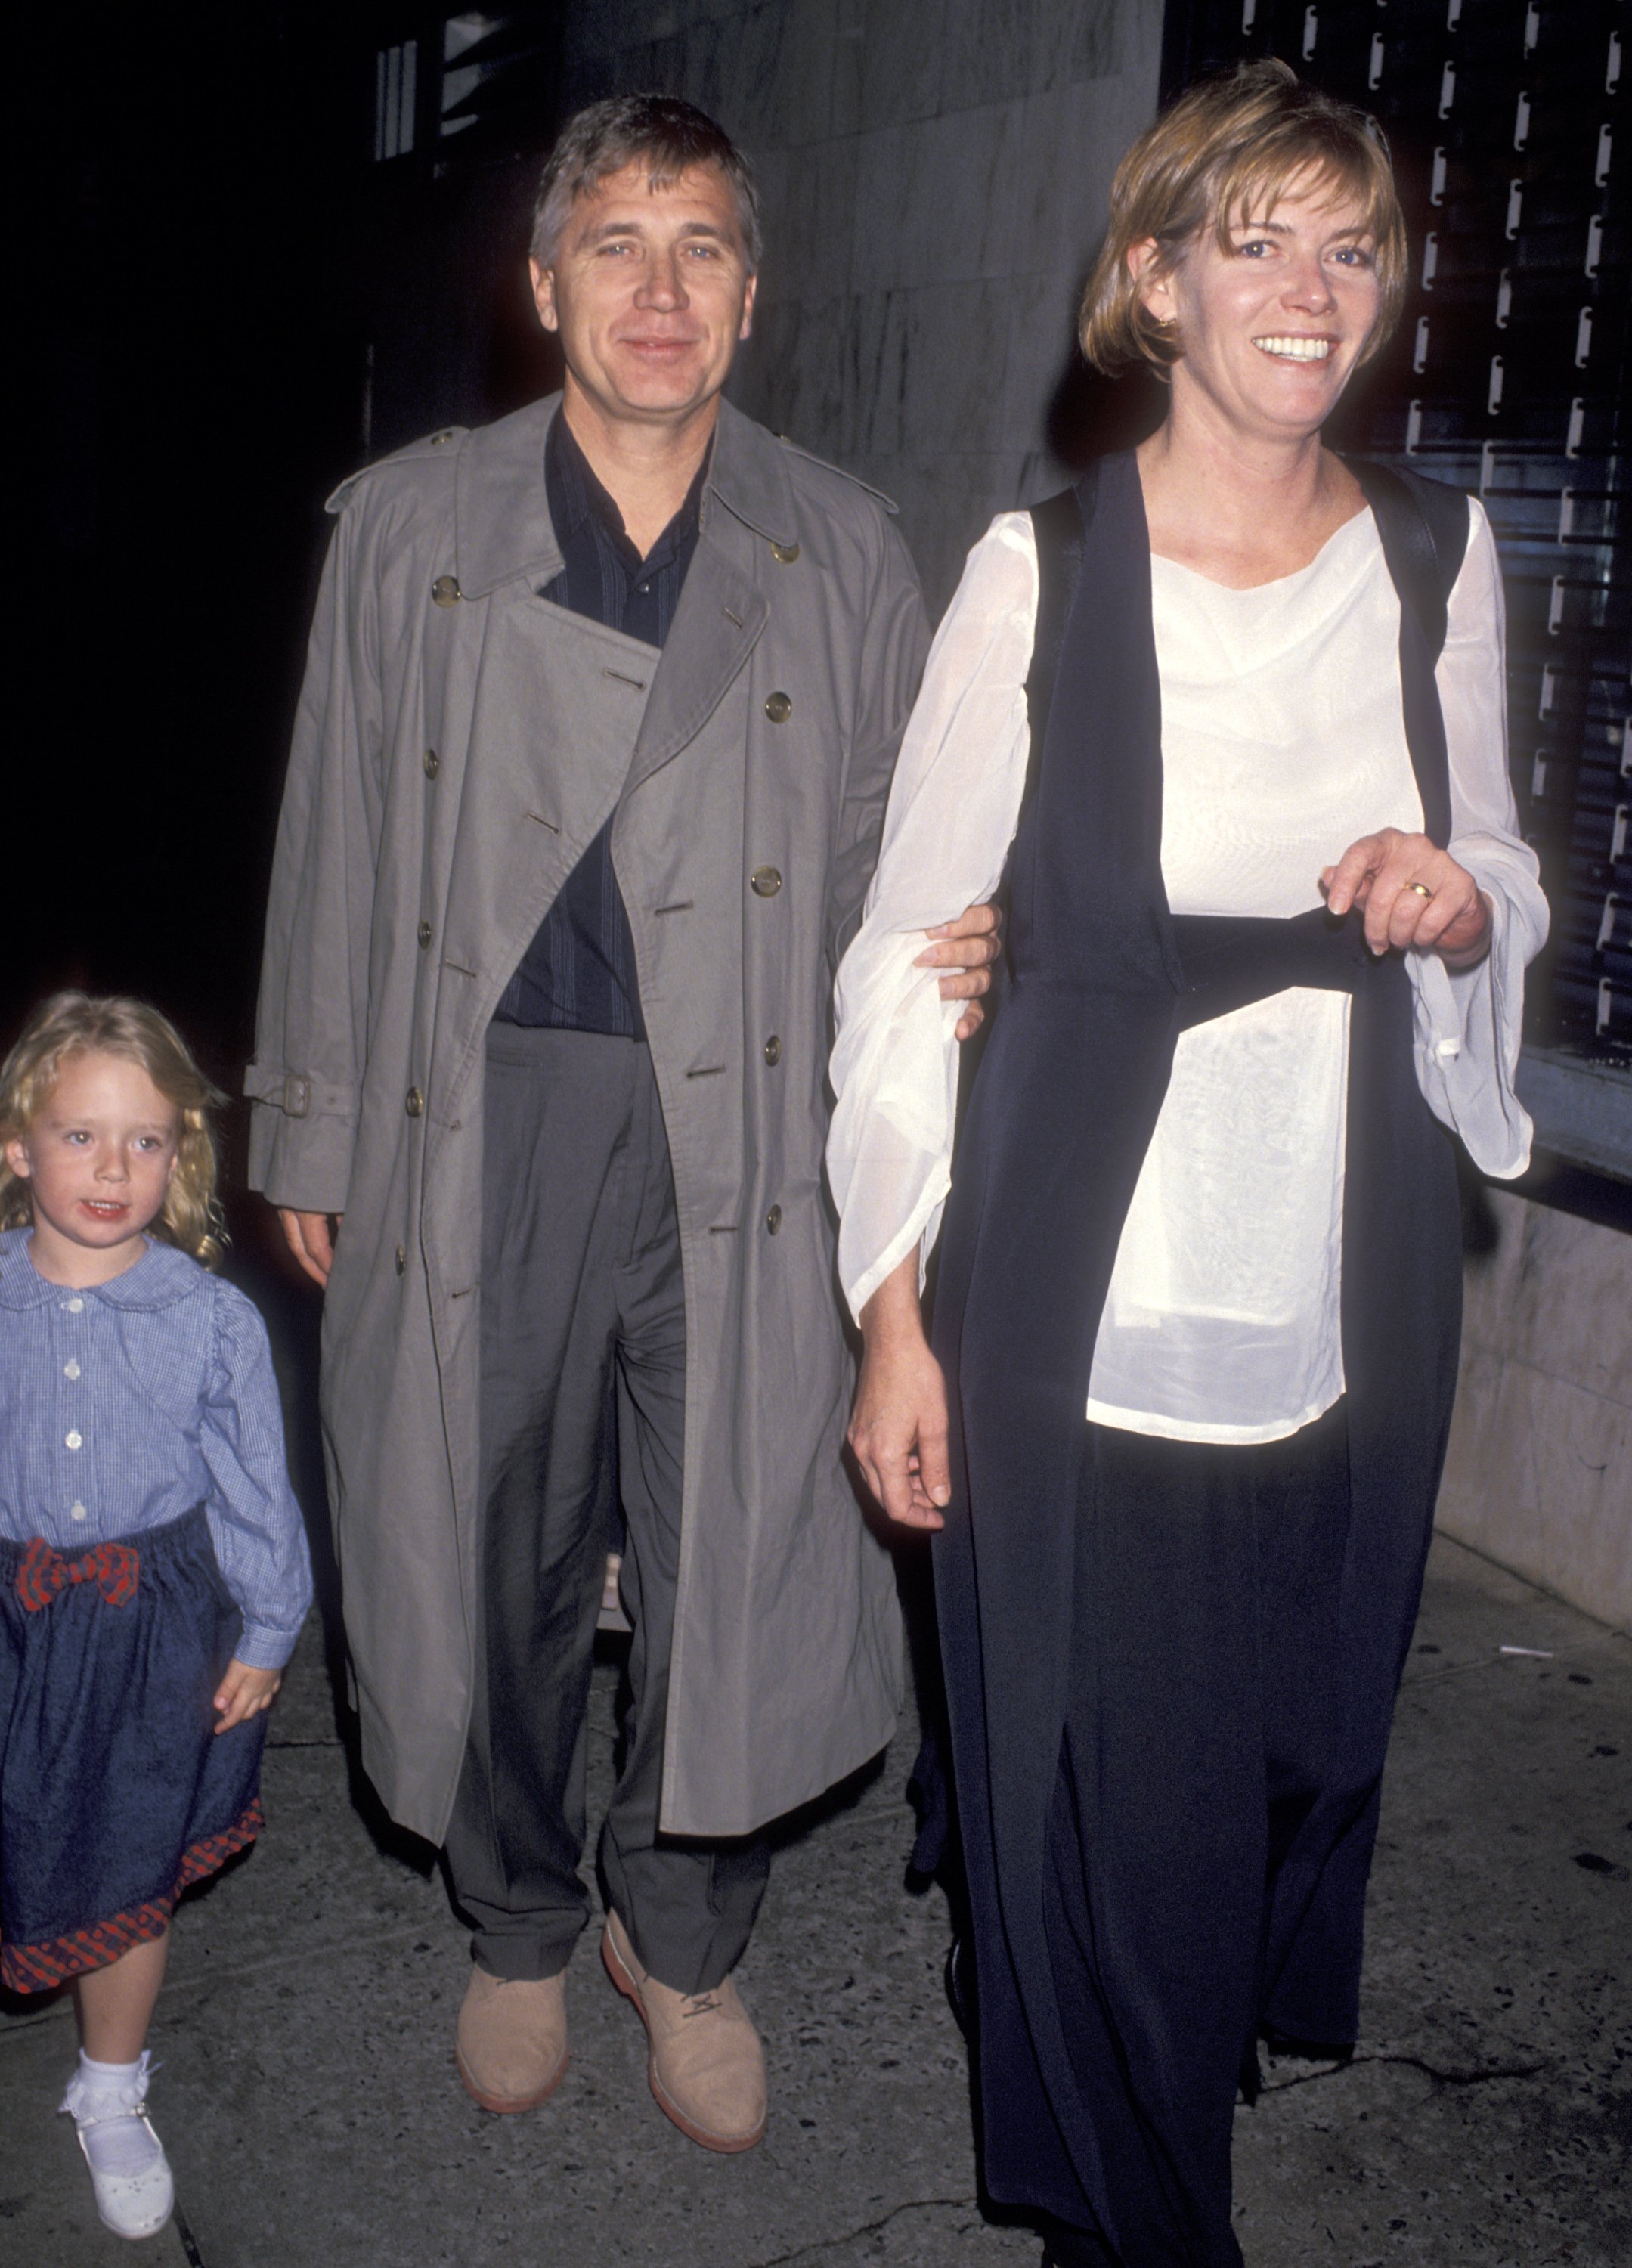 Actress Kelly McGillis, husband Fred Tillman, and daughter Kelsey Tillman attend the "Getting Even with Dad" New York City premiere on May 15,1994, at Plaza Theater in New York City, New York | Source: Getty Images